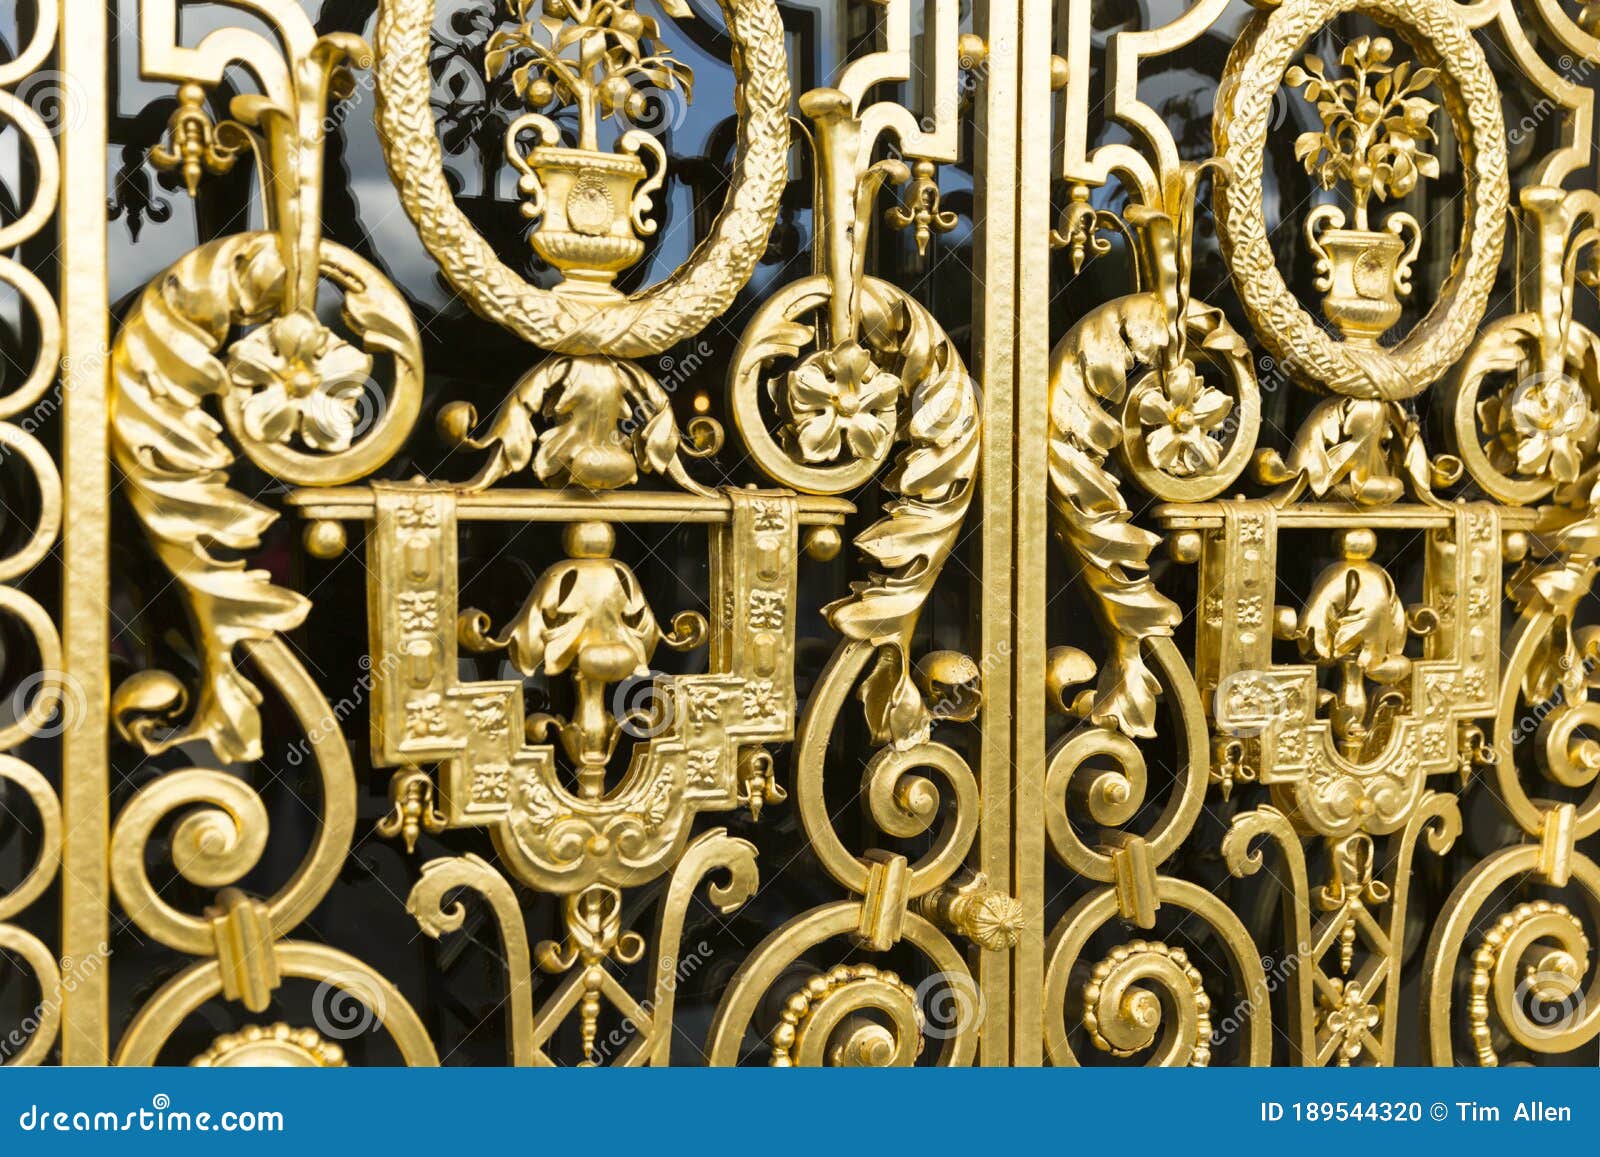 Royal Golden Gate Design with Amazong Detail Stock Photo - Image ...